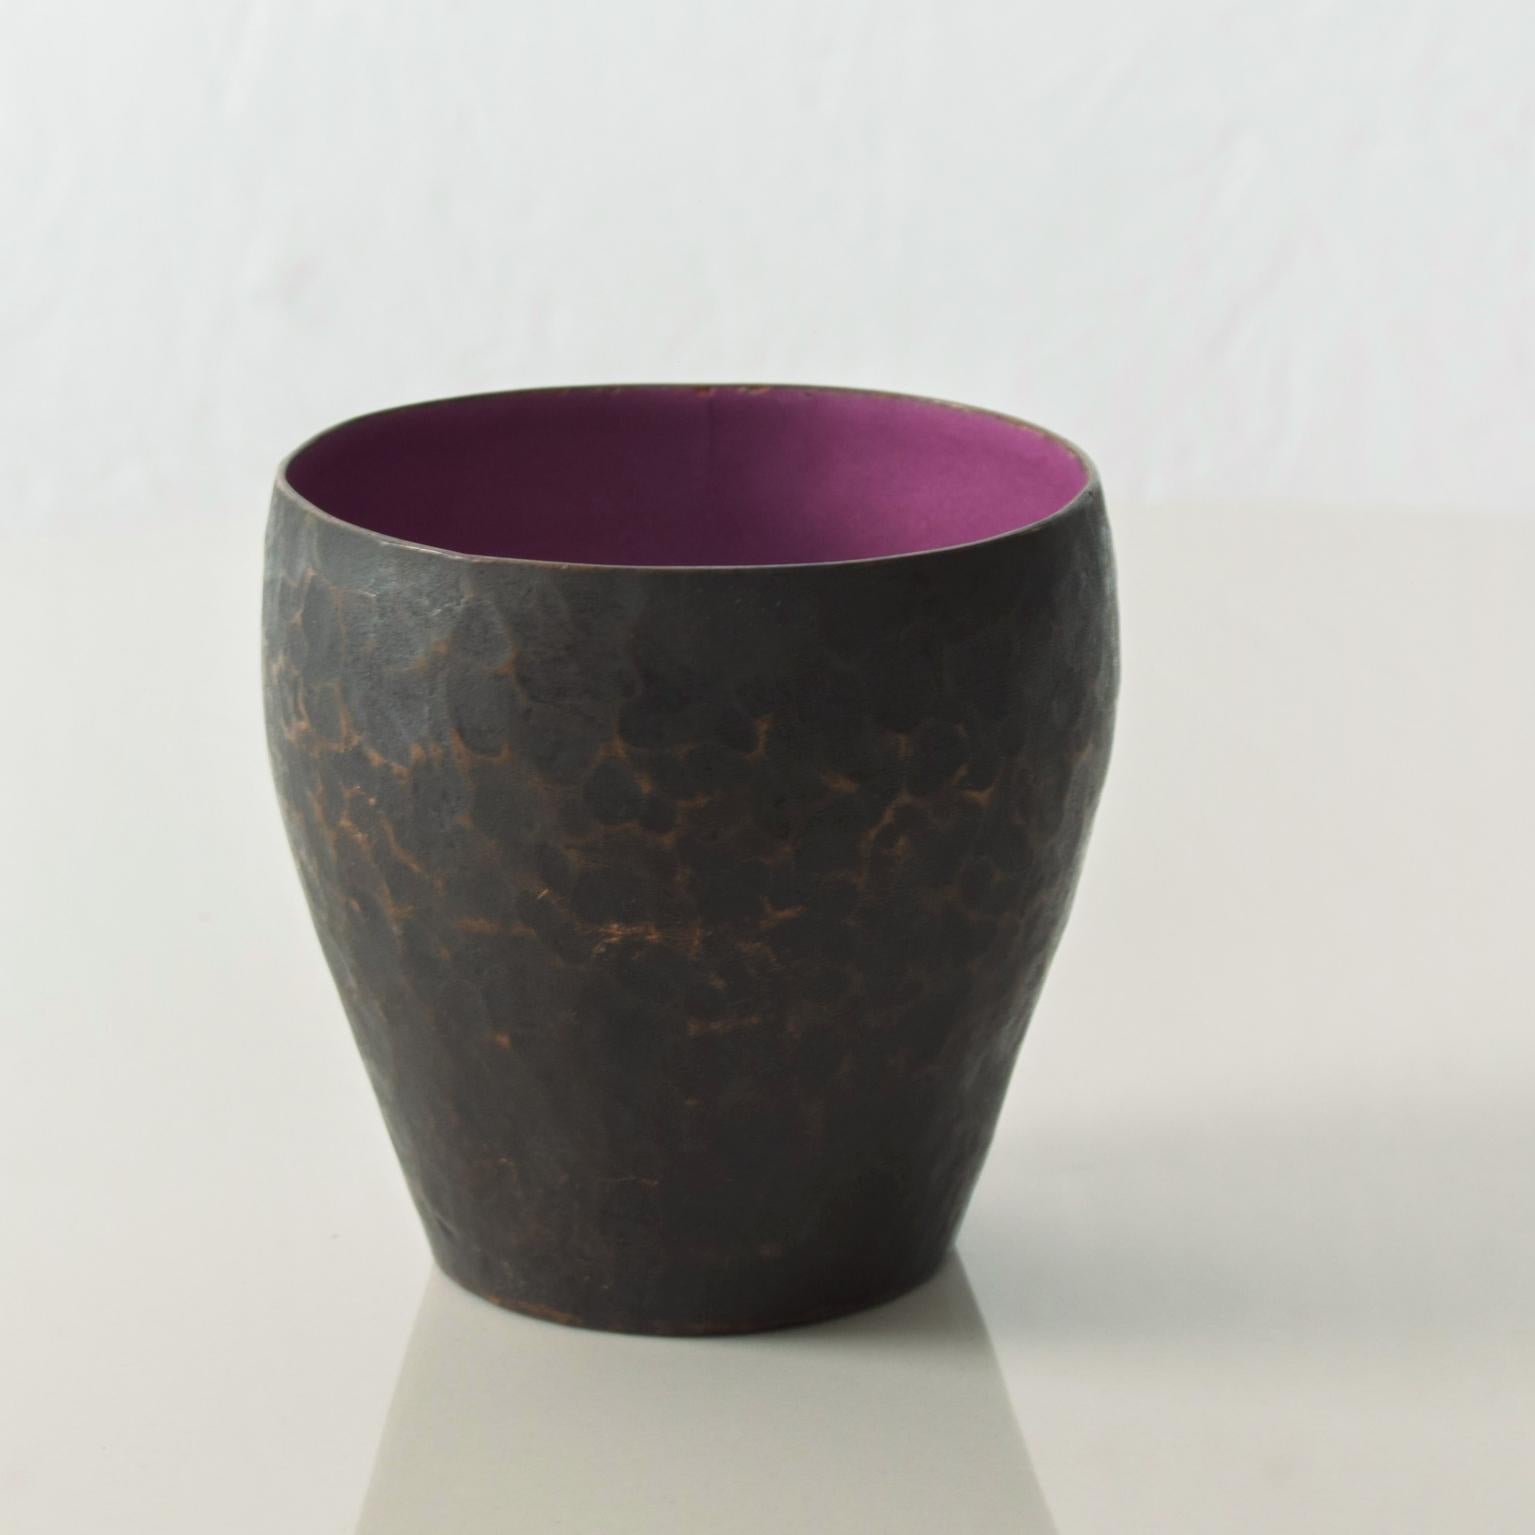 AMBIANIC presents
Petite Hammered Copper Enamel Vase with Purple Interior
Signed Raul Bellery
Dimensions: 2.75 H x 3 in diameter
Original Vintage unrestored preowned Condition.
Please see the images.